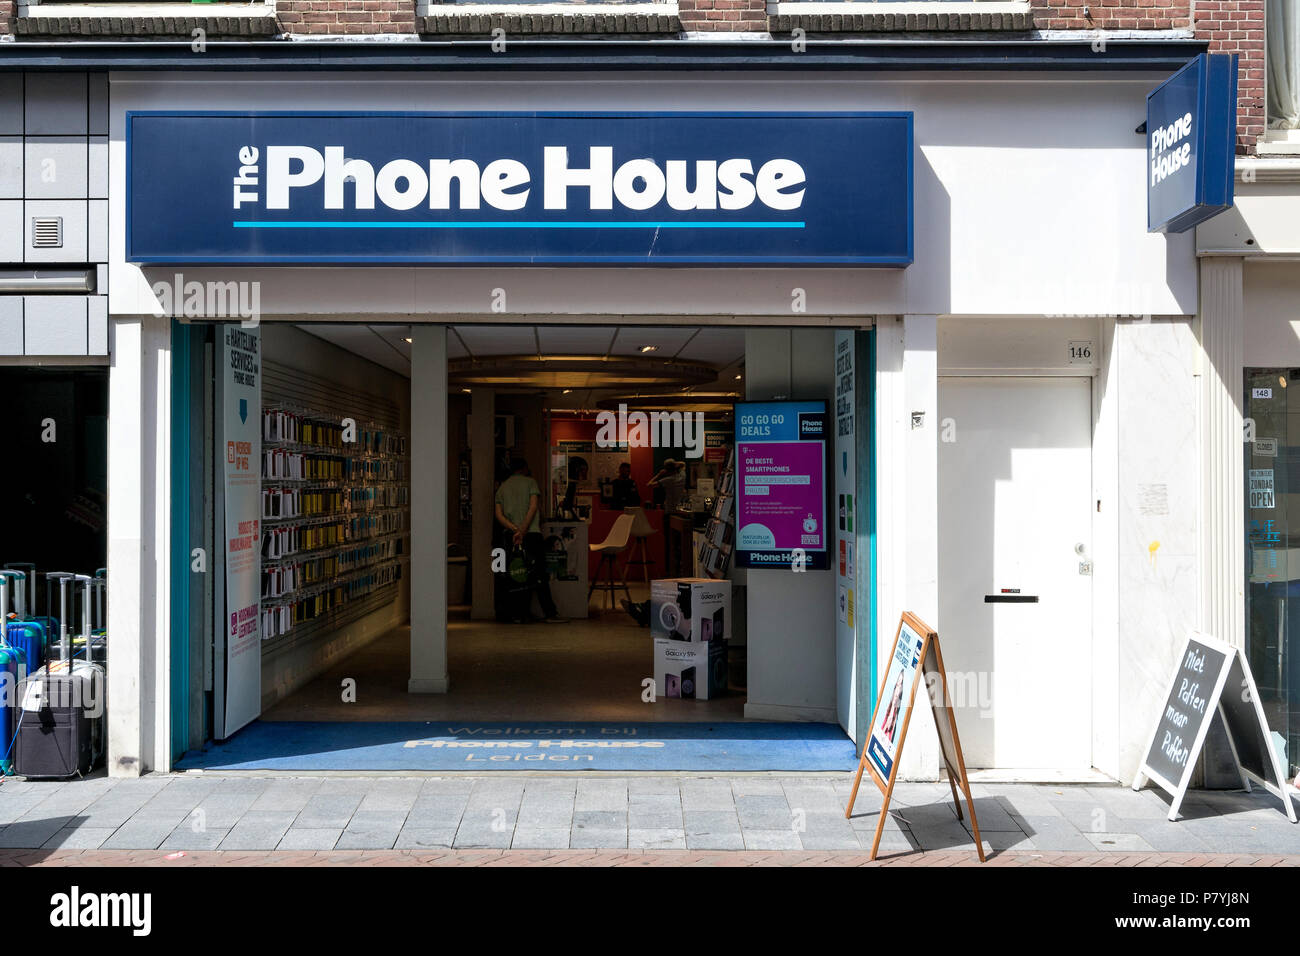 The Phone House branch in Leiden, Netherlands. The Carphone Warehouse Ltd. is a British mobile phone retailer, with over 2,400 stores across Europe. Stock Photo